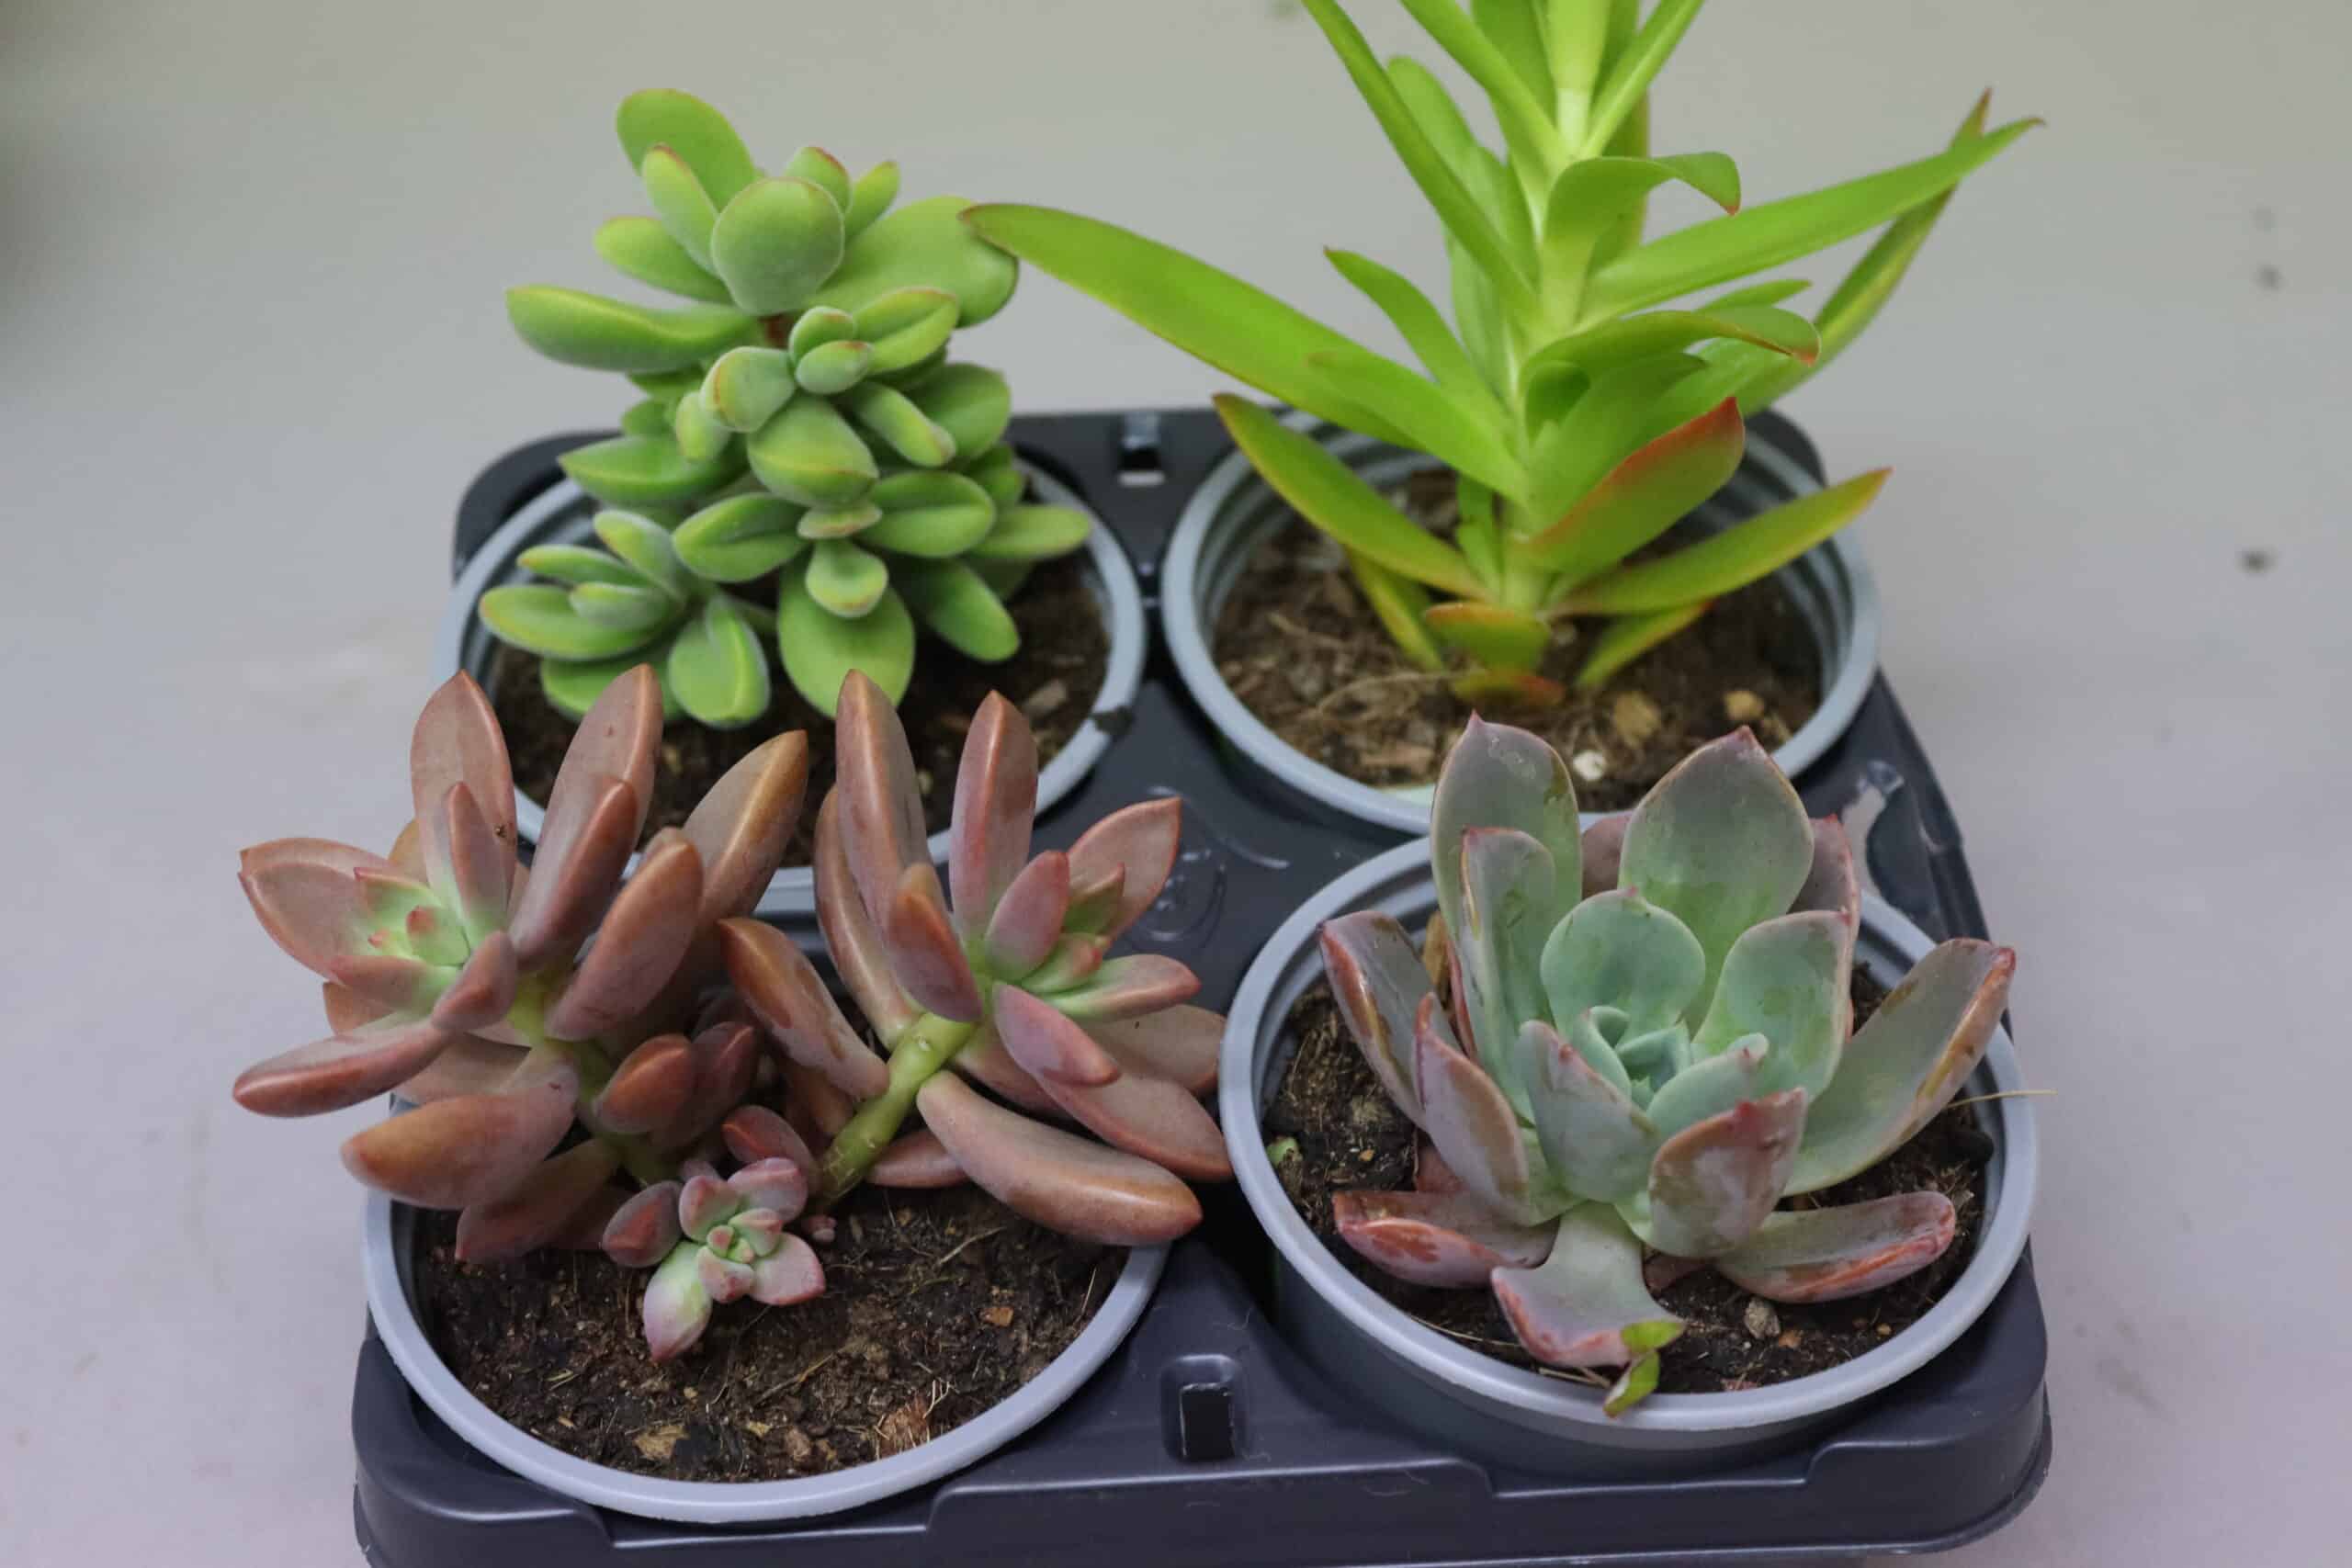 Two green and two red and pink potted succulents arranged on a black tray with a plain background.